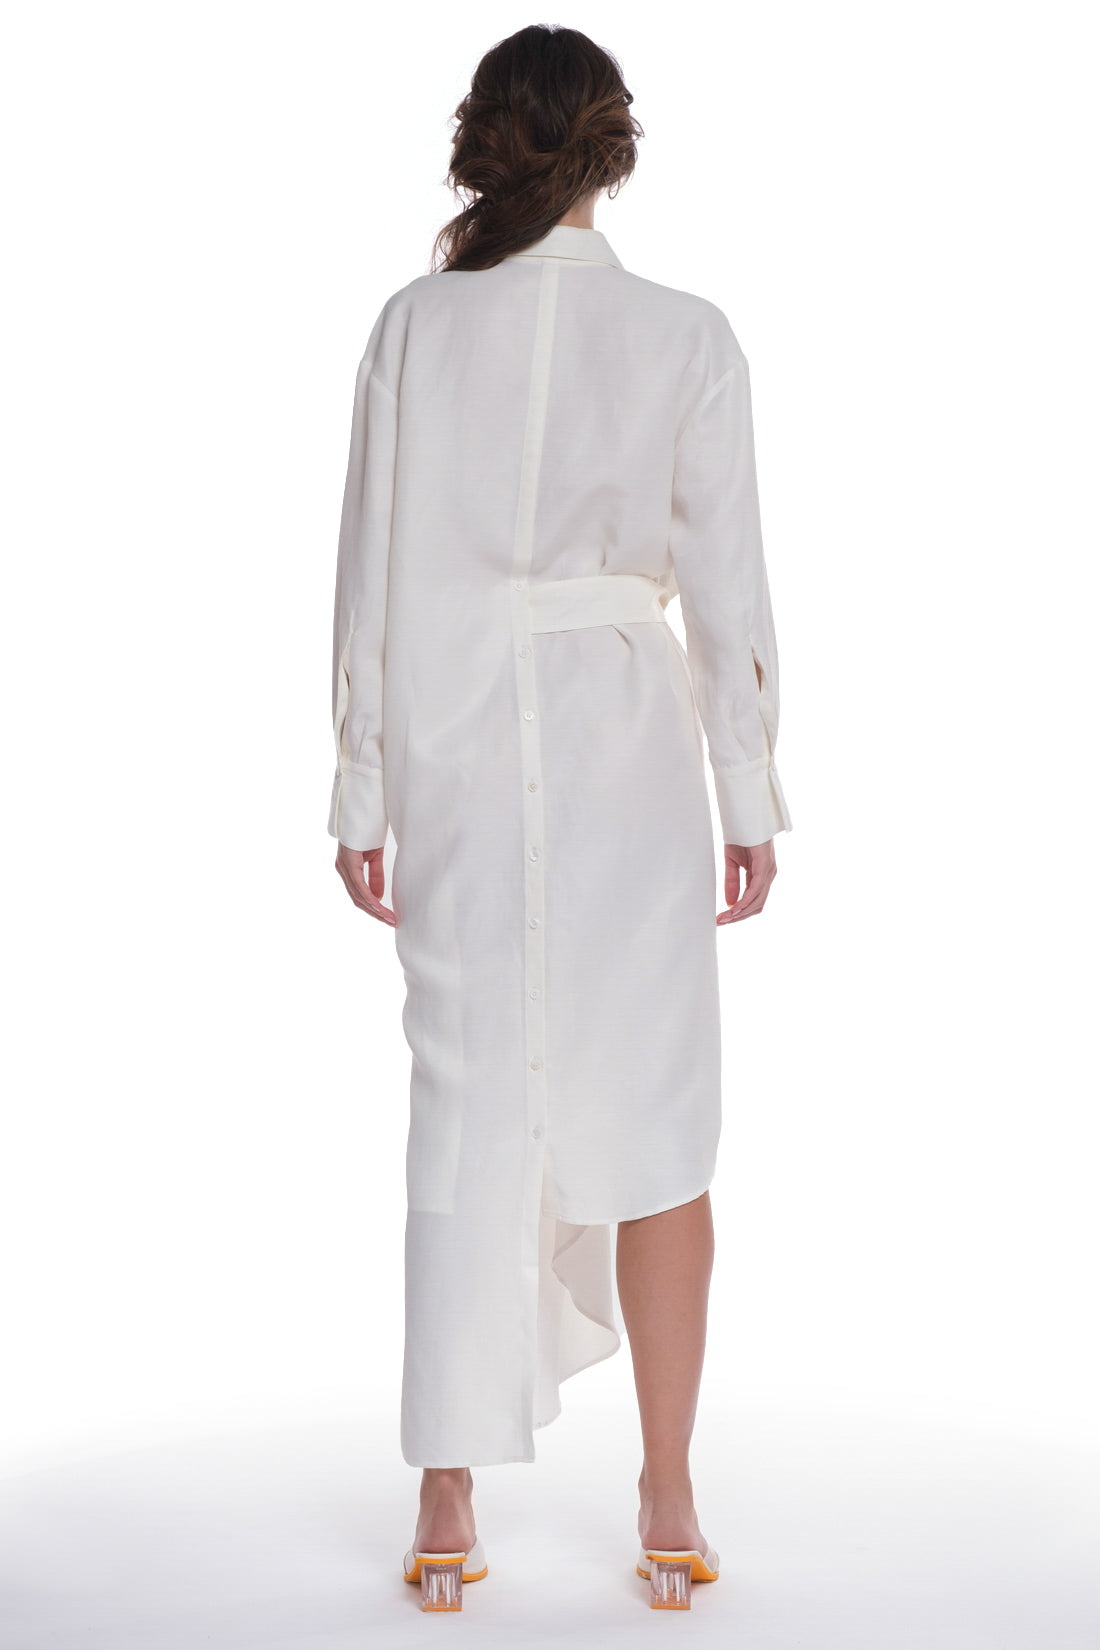 ASYMMETRICAL LONG SHIRT-DRESS WITH RUFFLE ON THE SIDE, OPEN COLLAR, TIED WITH A BELT, BUTTONING ON THE BACK